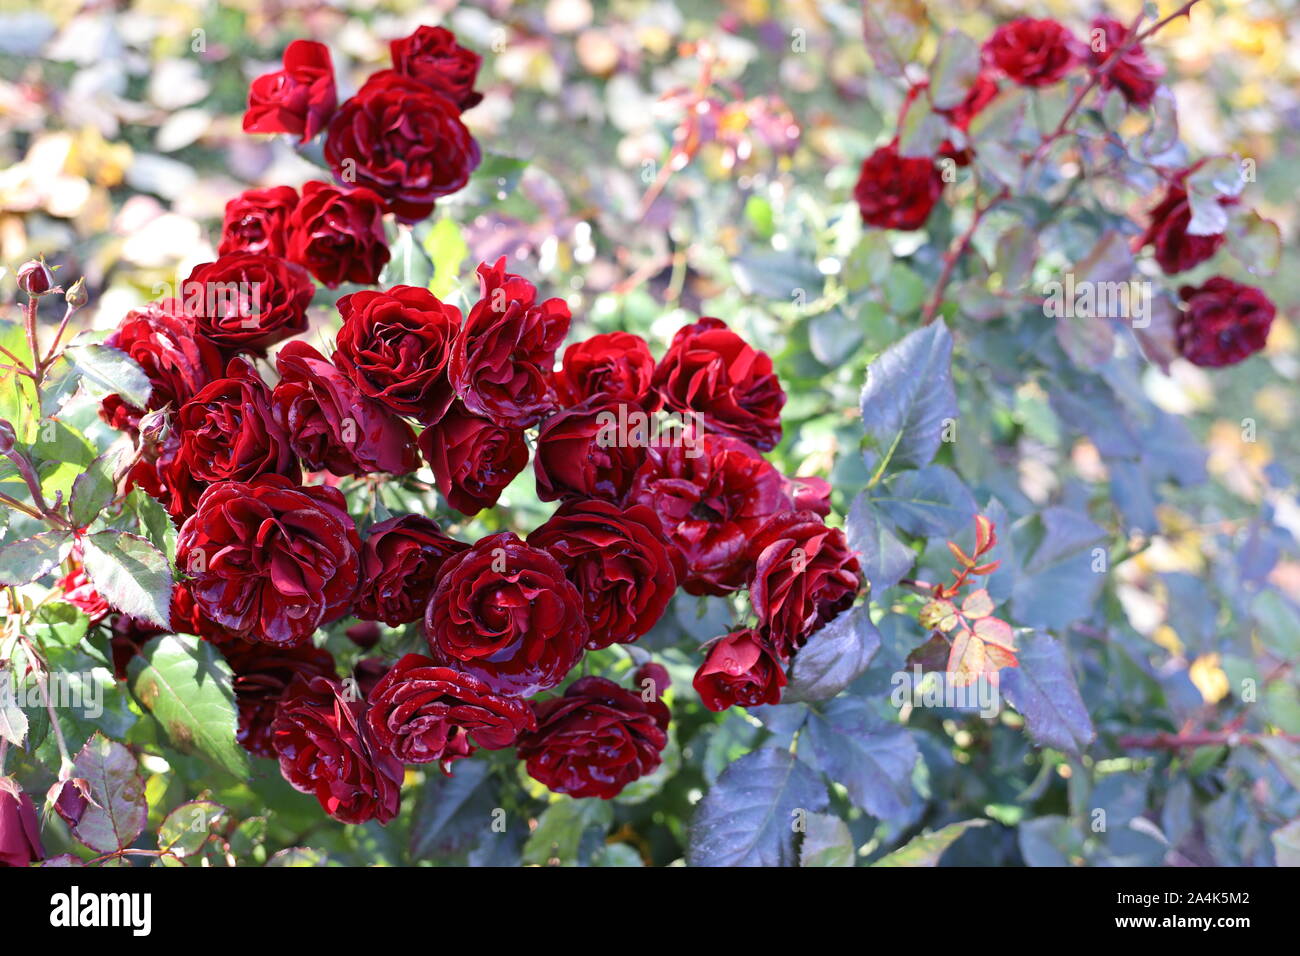 Beautiful blood red roses in the garden. Rain drops like crystals on the petals. Romantic background photo. Wedding, Valentines day, dreamy mood, cele Stock Photo